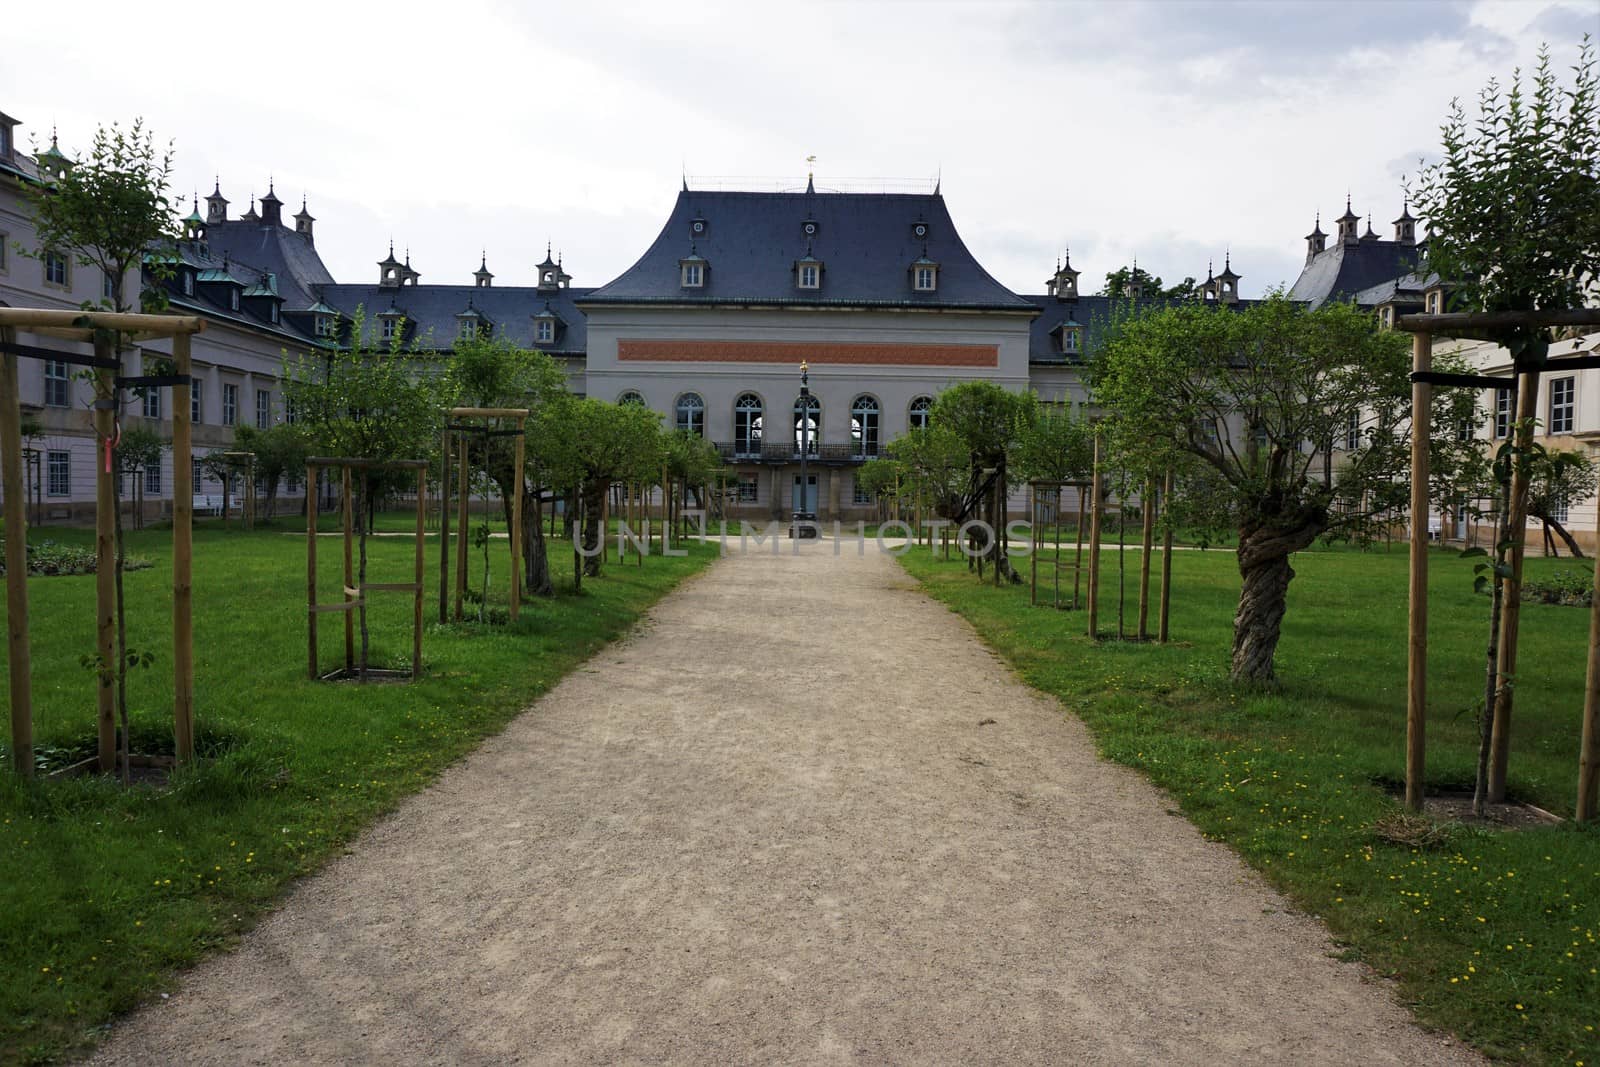 Garden surrounding the New Palace of Pillnitz Castle in Dresden by pisces2386